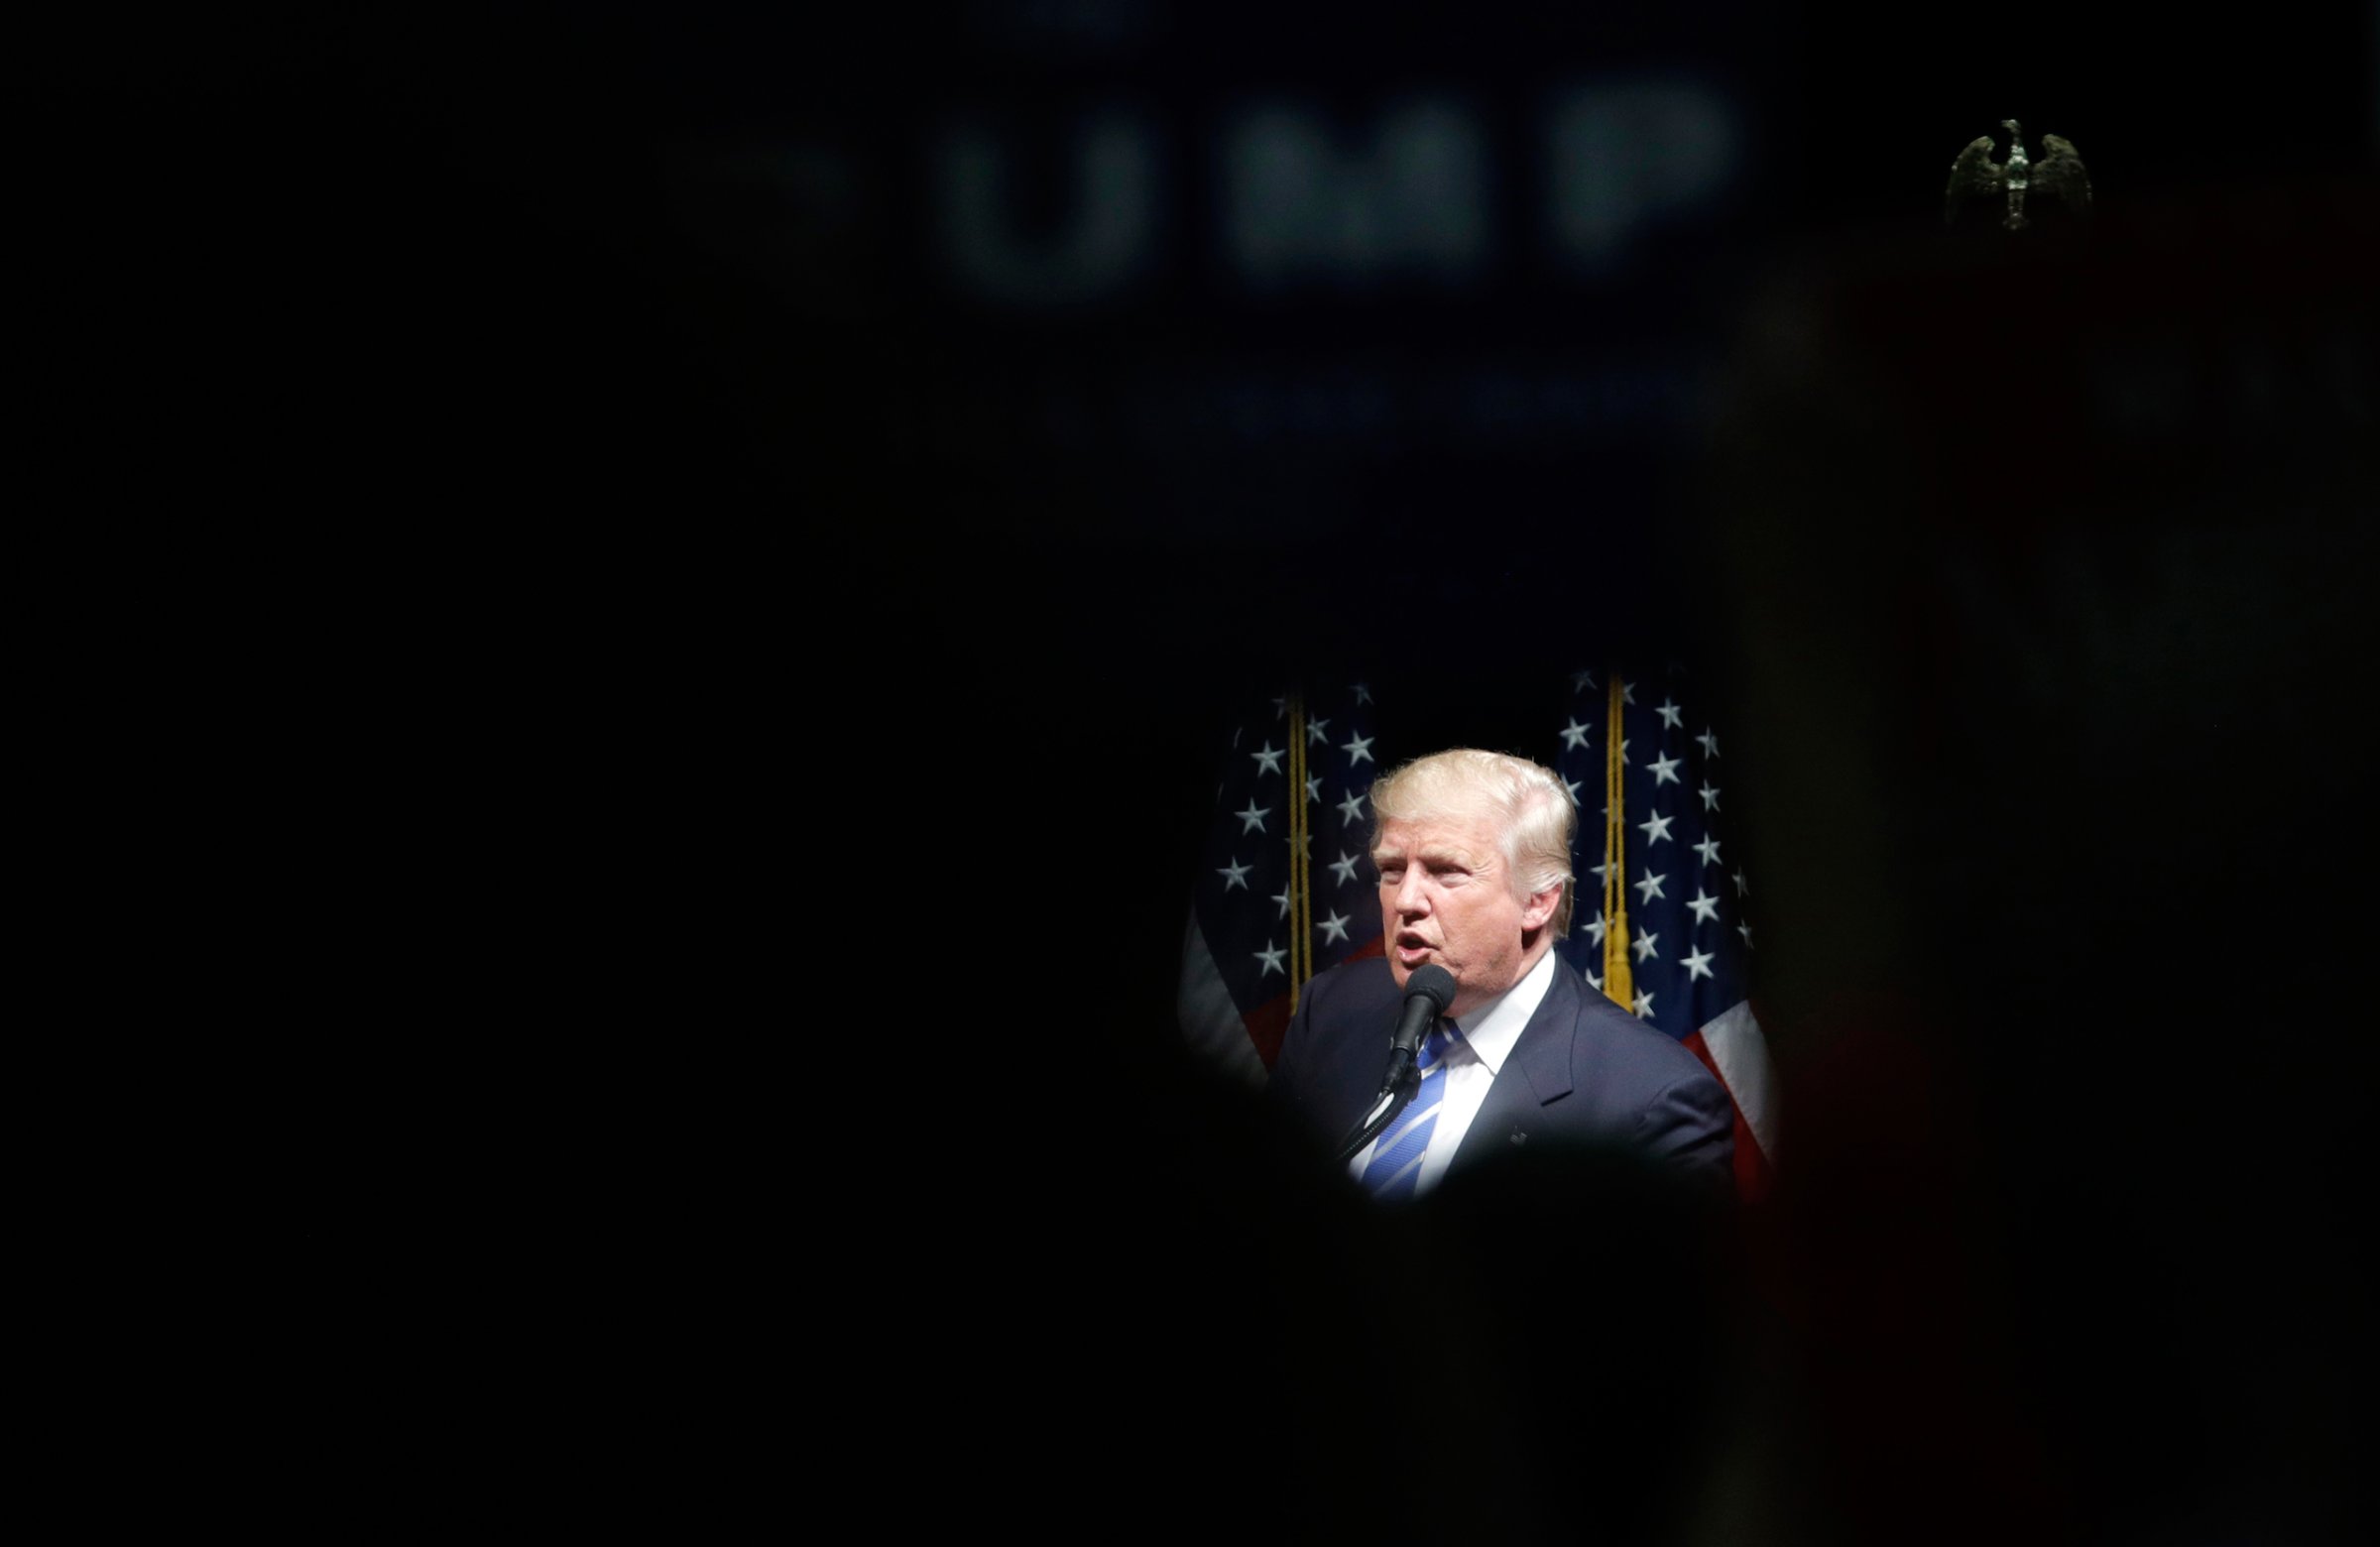 Republican presidential candidate Donald Trump speaks at a rally, Wednesday, Sept. 28, 2016, in Council Bluffs, Iowa. (AP Photo/John Locher)